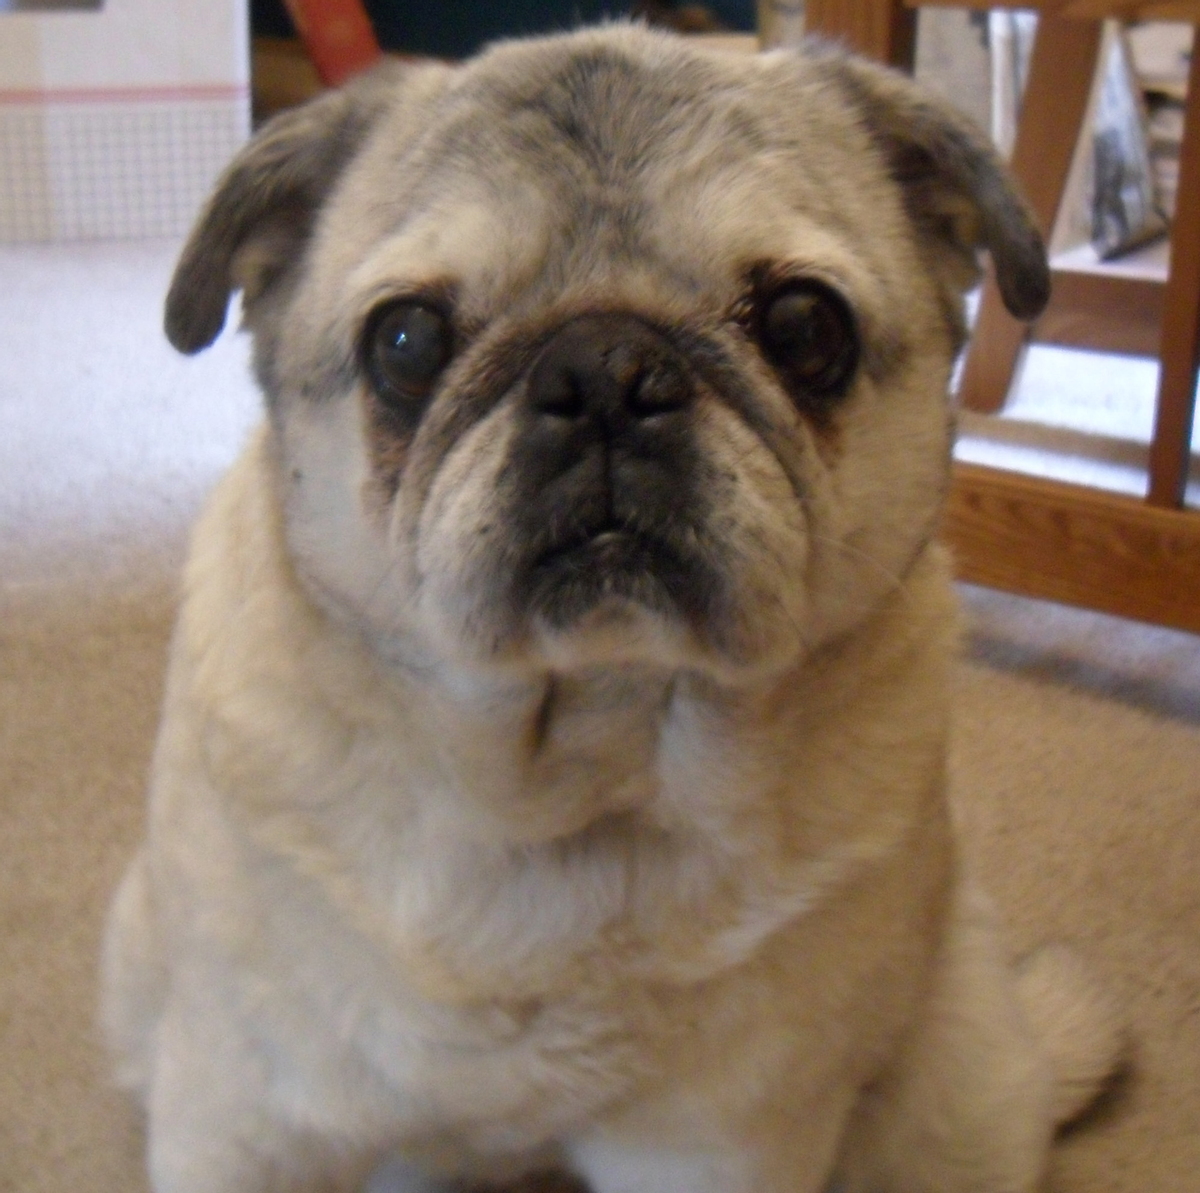 The author's 15-year-old pug, Belle